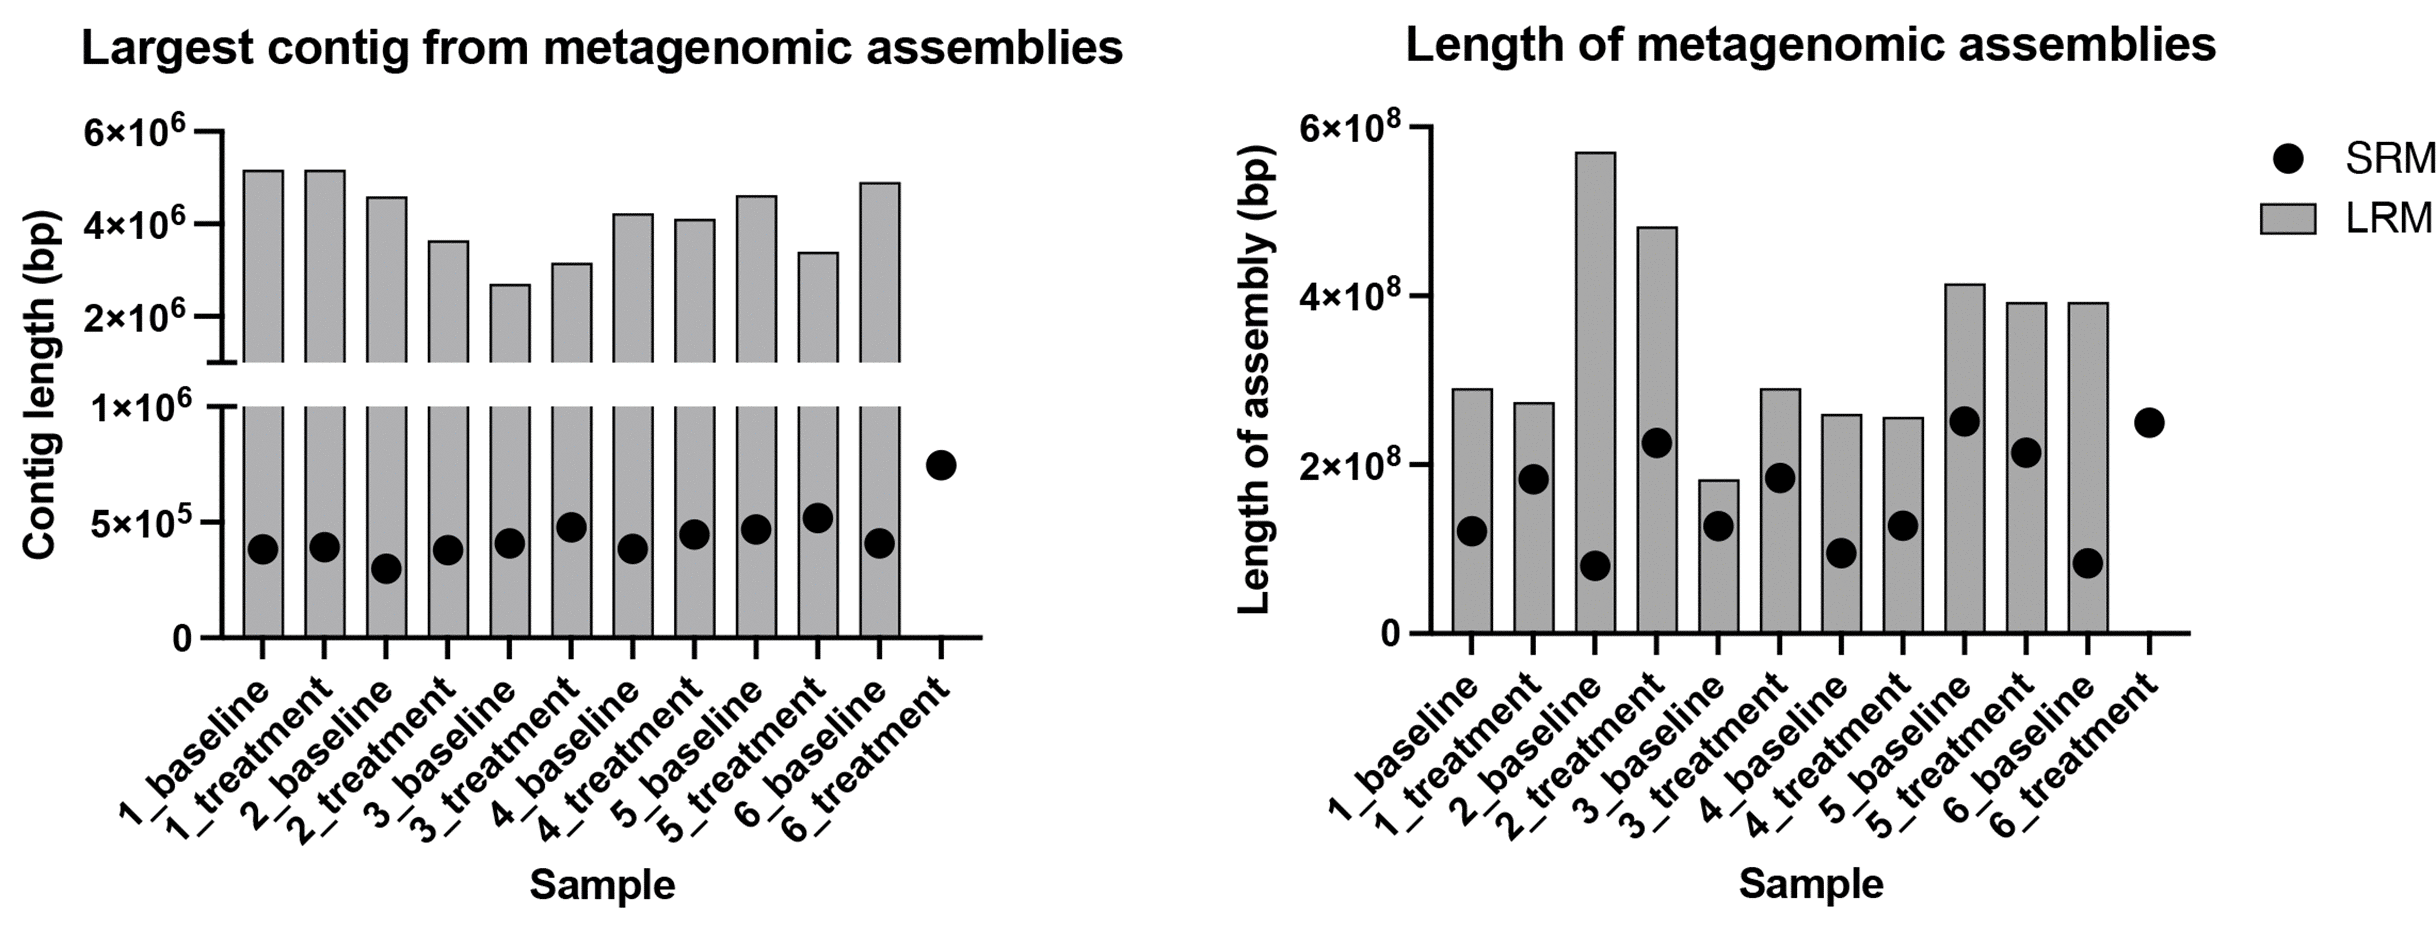 two graphs - one showing largest contig from metagenomic assemblies and the second showing the length of metagenomic assemblies vs. baselines - Gehrig Figure 6a